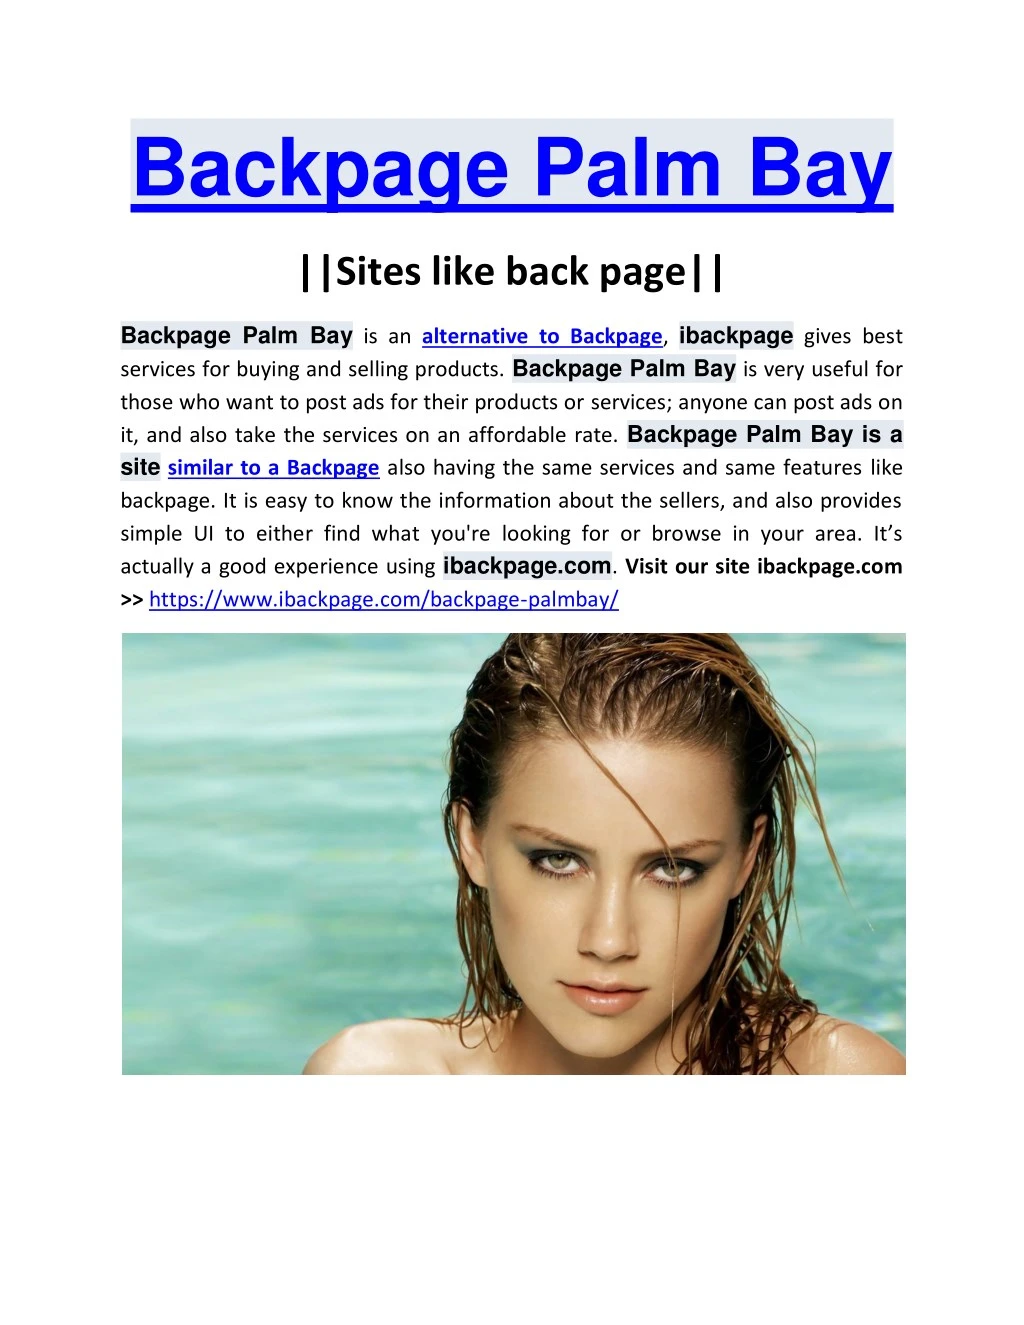 backpage palm bay